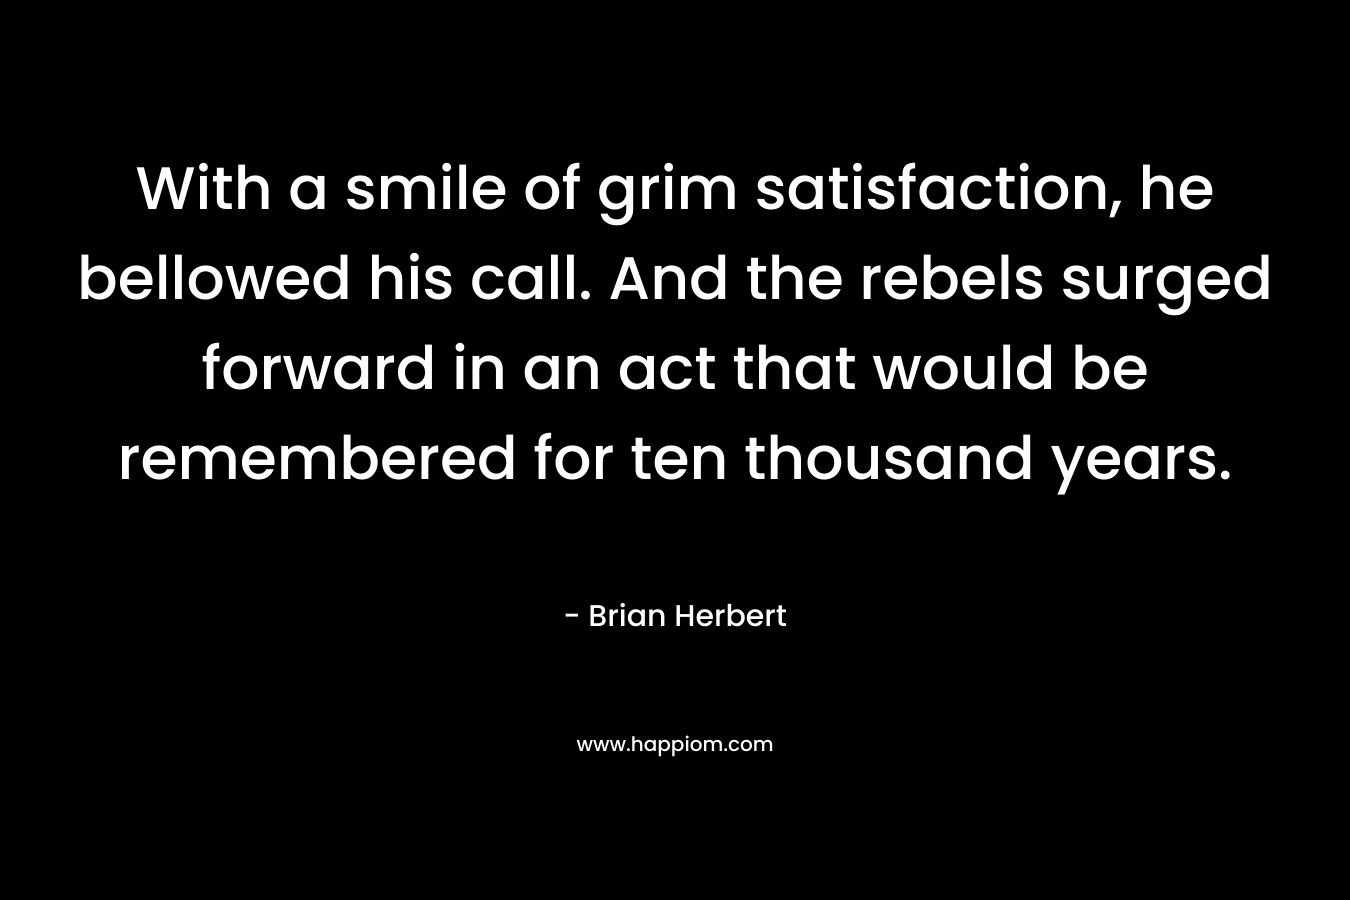 With a smile of grim satisfaction, he bellowed his call. And the rebels surged forward in an act that would be remembered for ten thousand years. – Brian Herbert